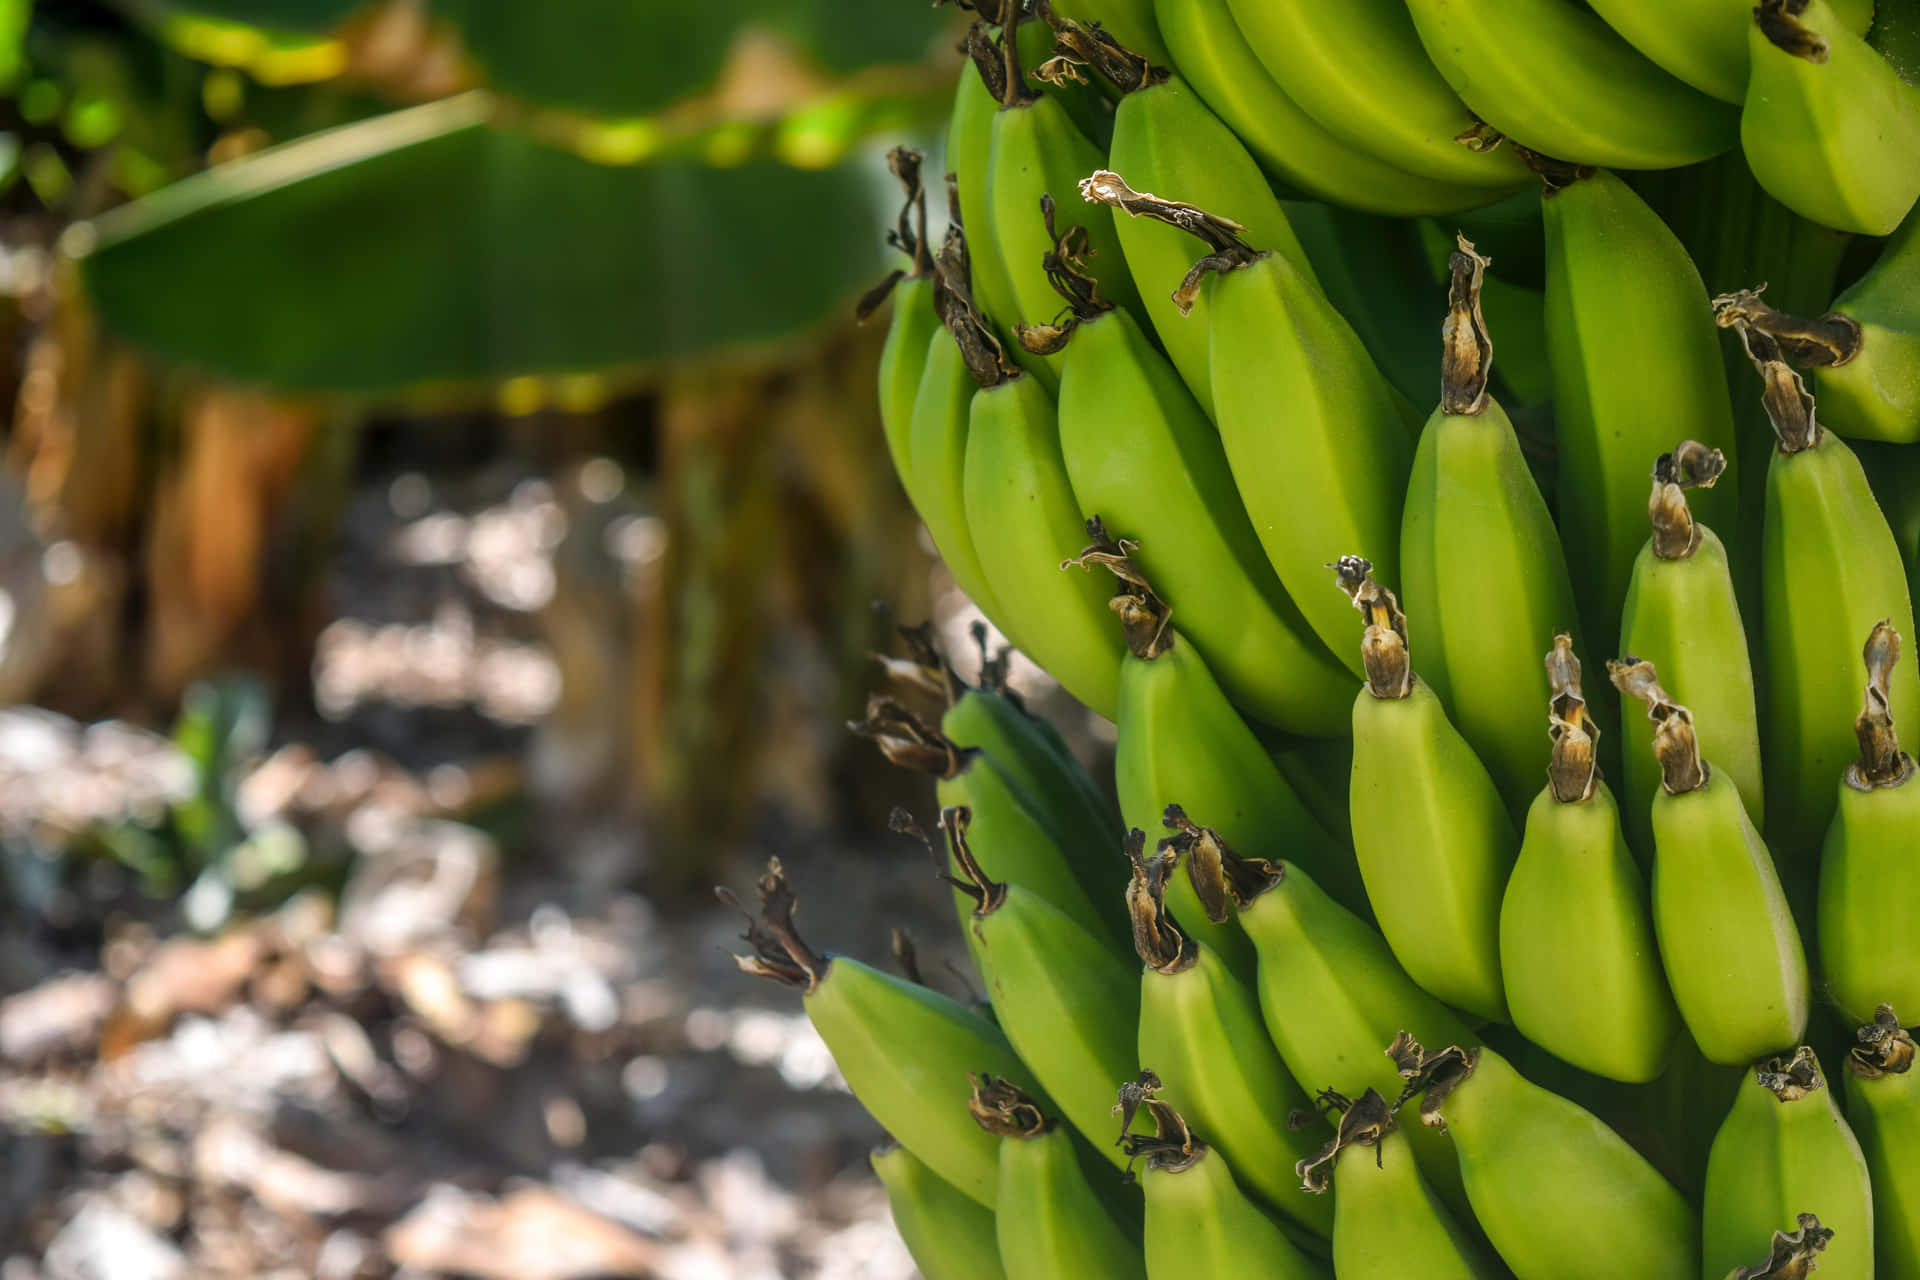 Standing Tall and Fruiting - A Banana Tree